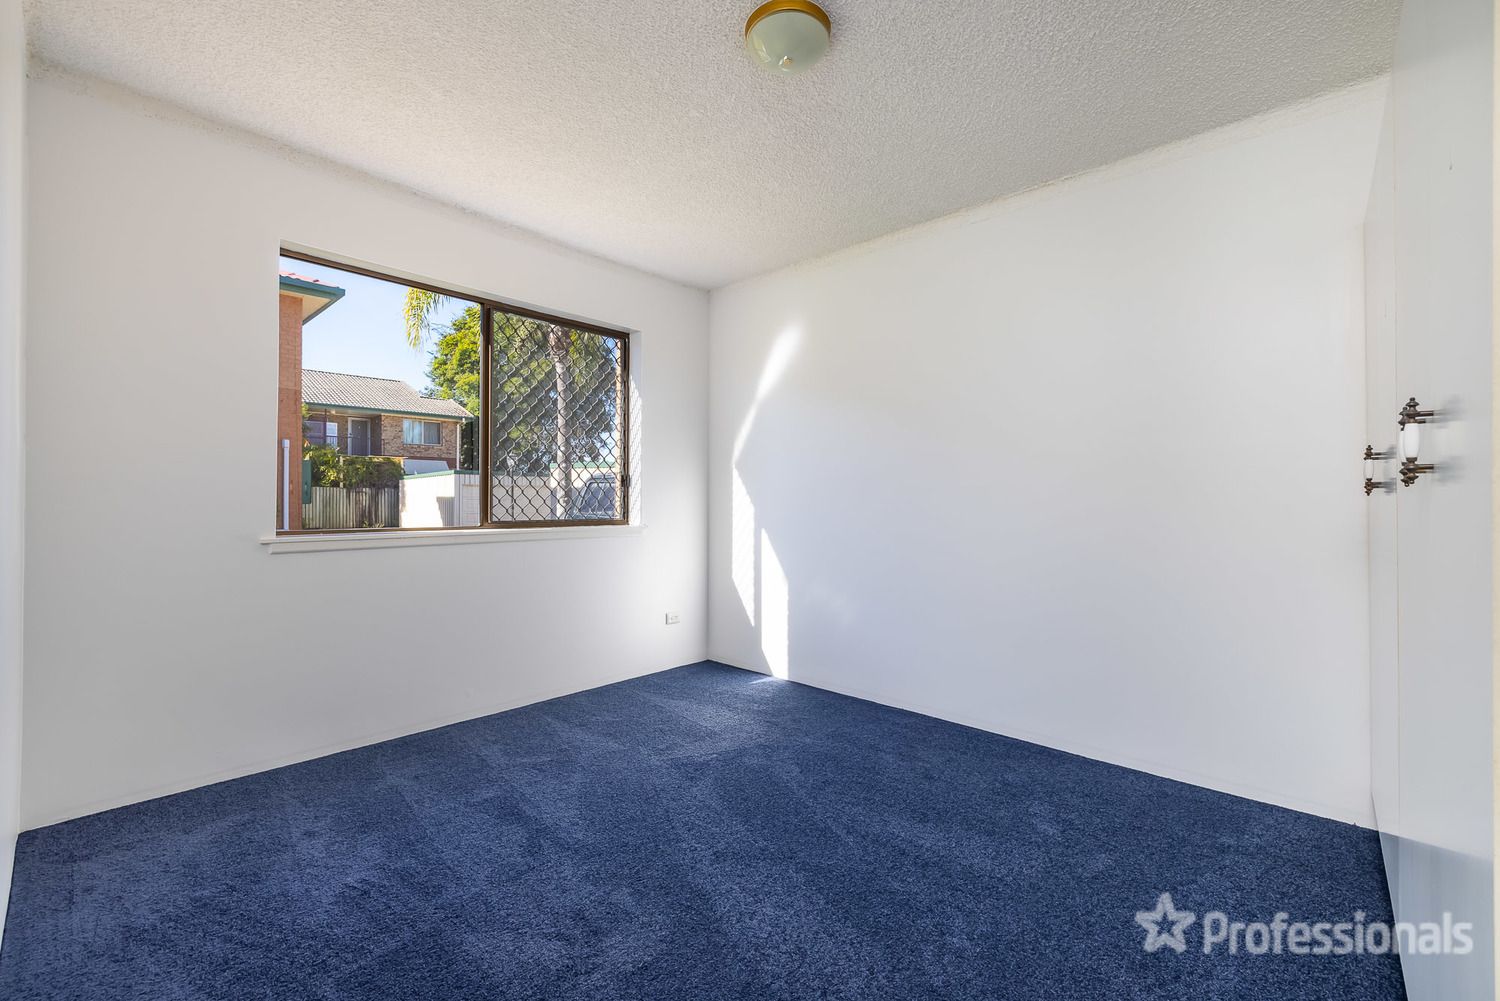 2/73 Lower King Street, Caboolture QLD 4510, Image 2